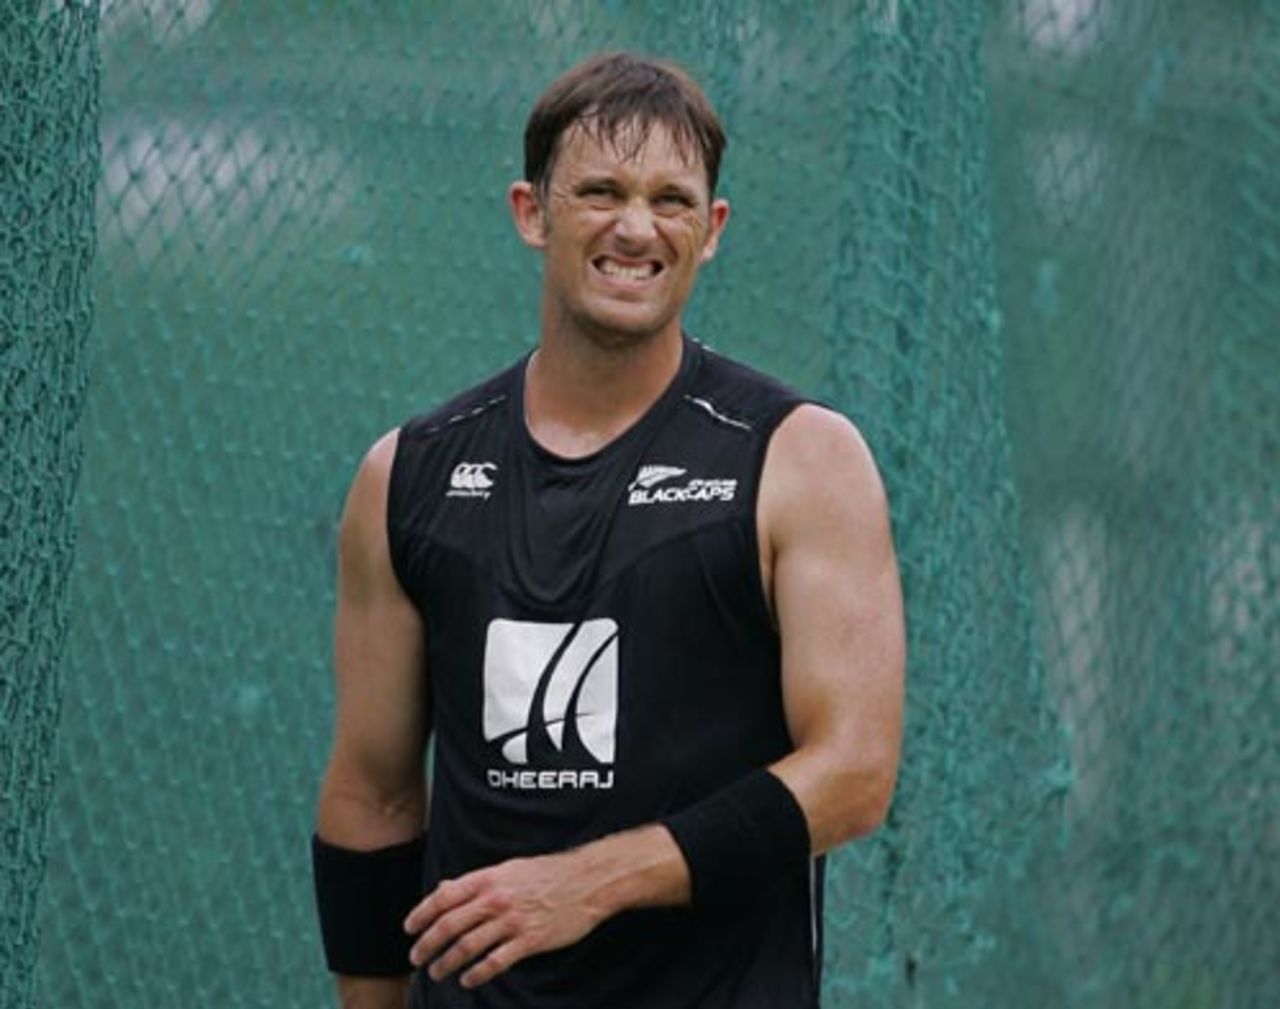 Shane Bond grimaces during a practice session, Colombo, September 7, 2009